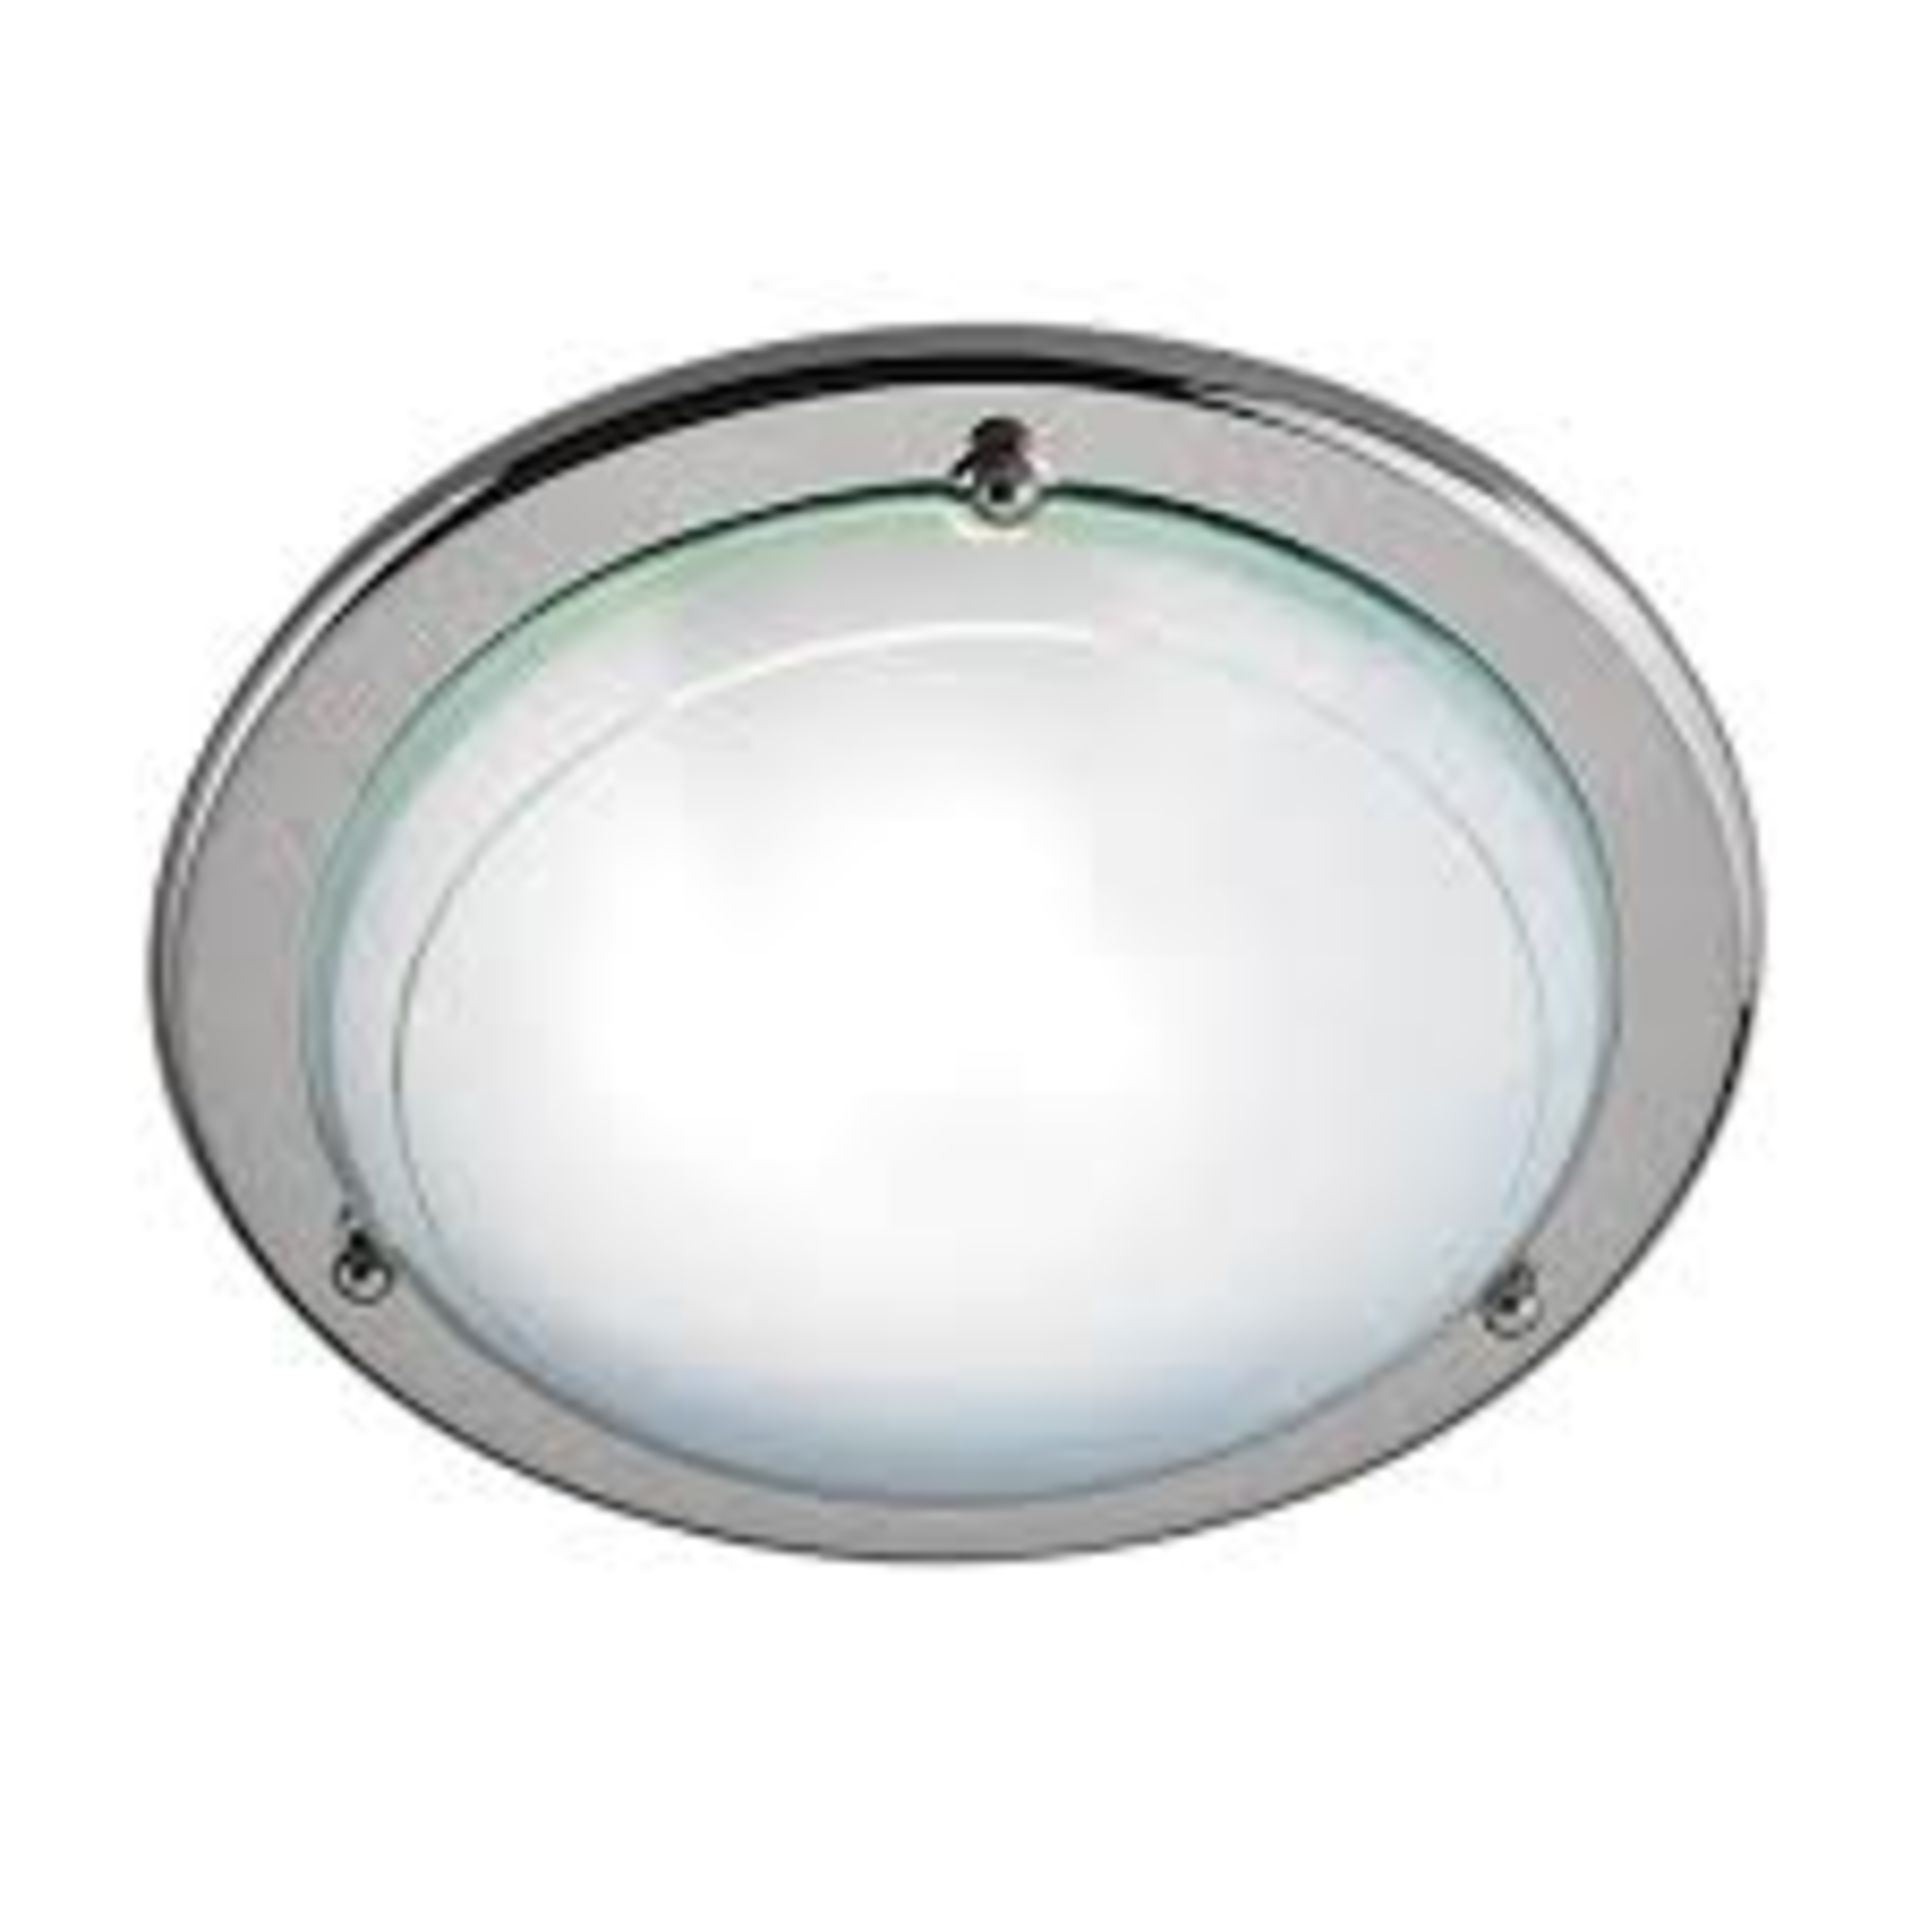 2 x Searchlight Flush Fitting finished in chrome - Ref: 702CC - New and Boxed - - Image 4 of 4